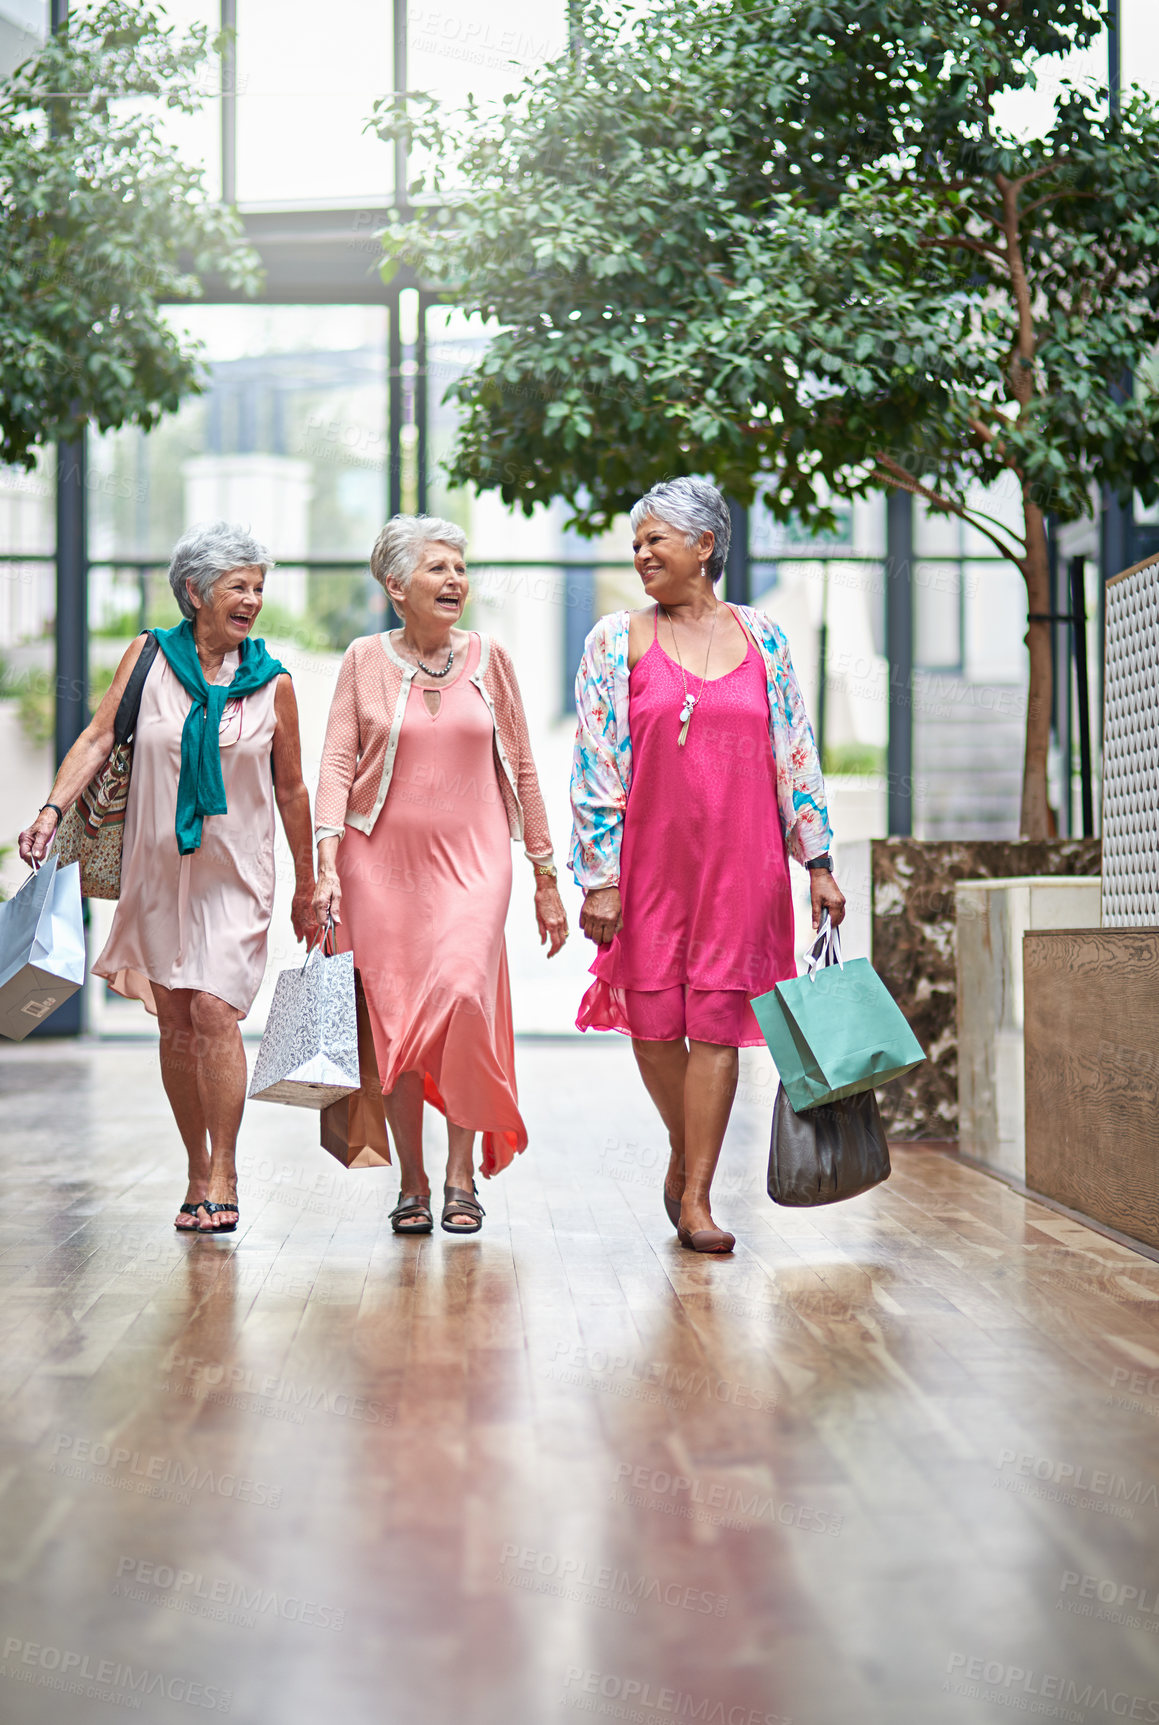 Buy stock photo Full length shot of a three senior women out on a shopping spree